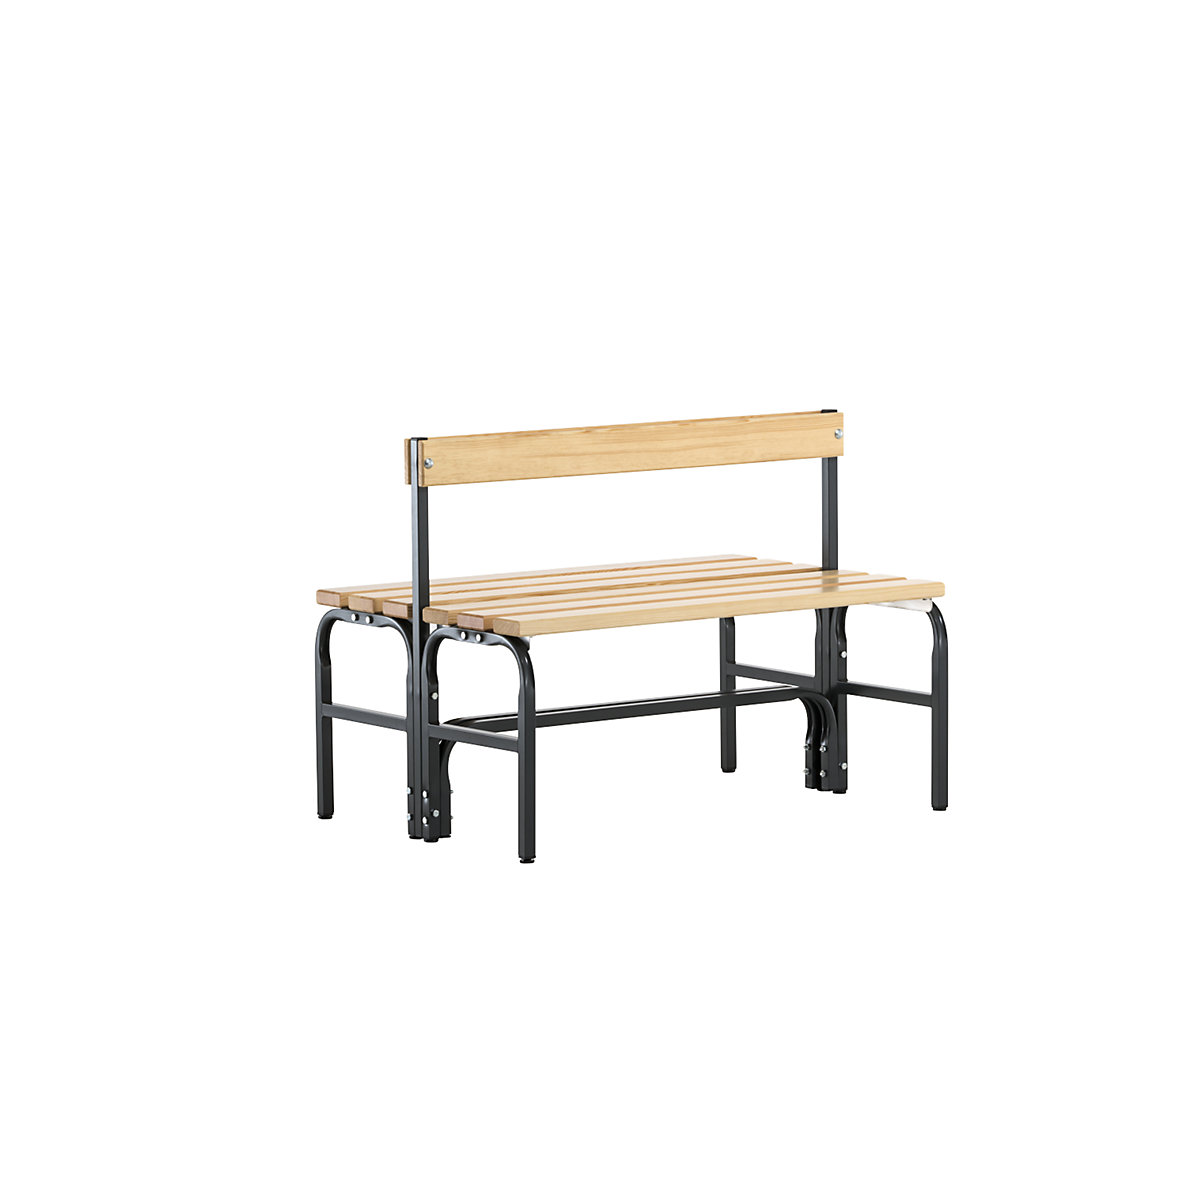 Half height cloakroom bench with back rest, double sided – Sypro